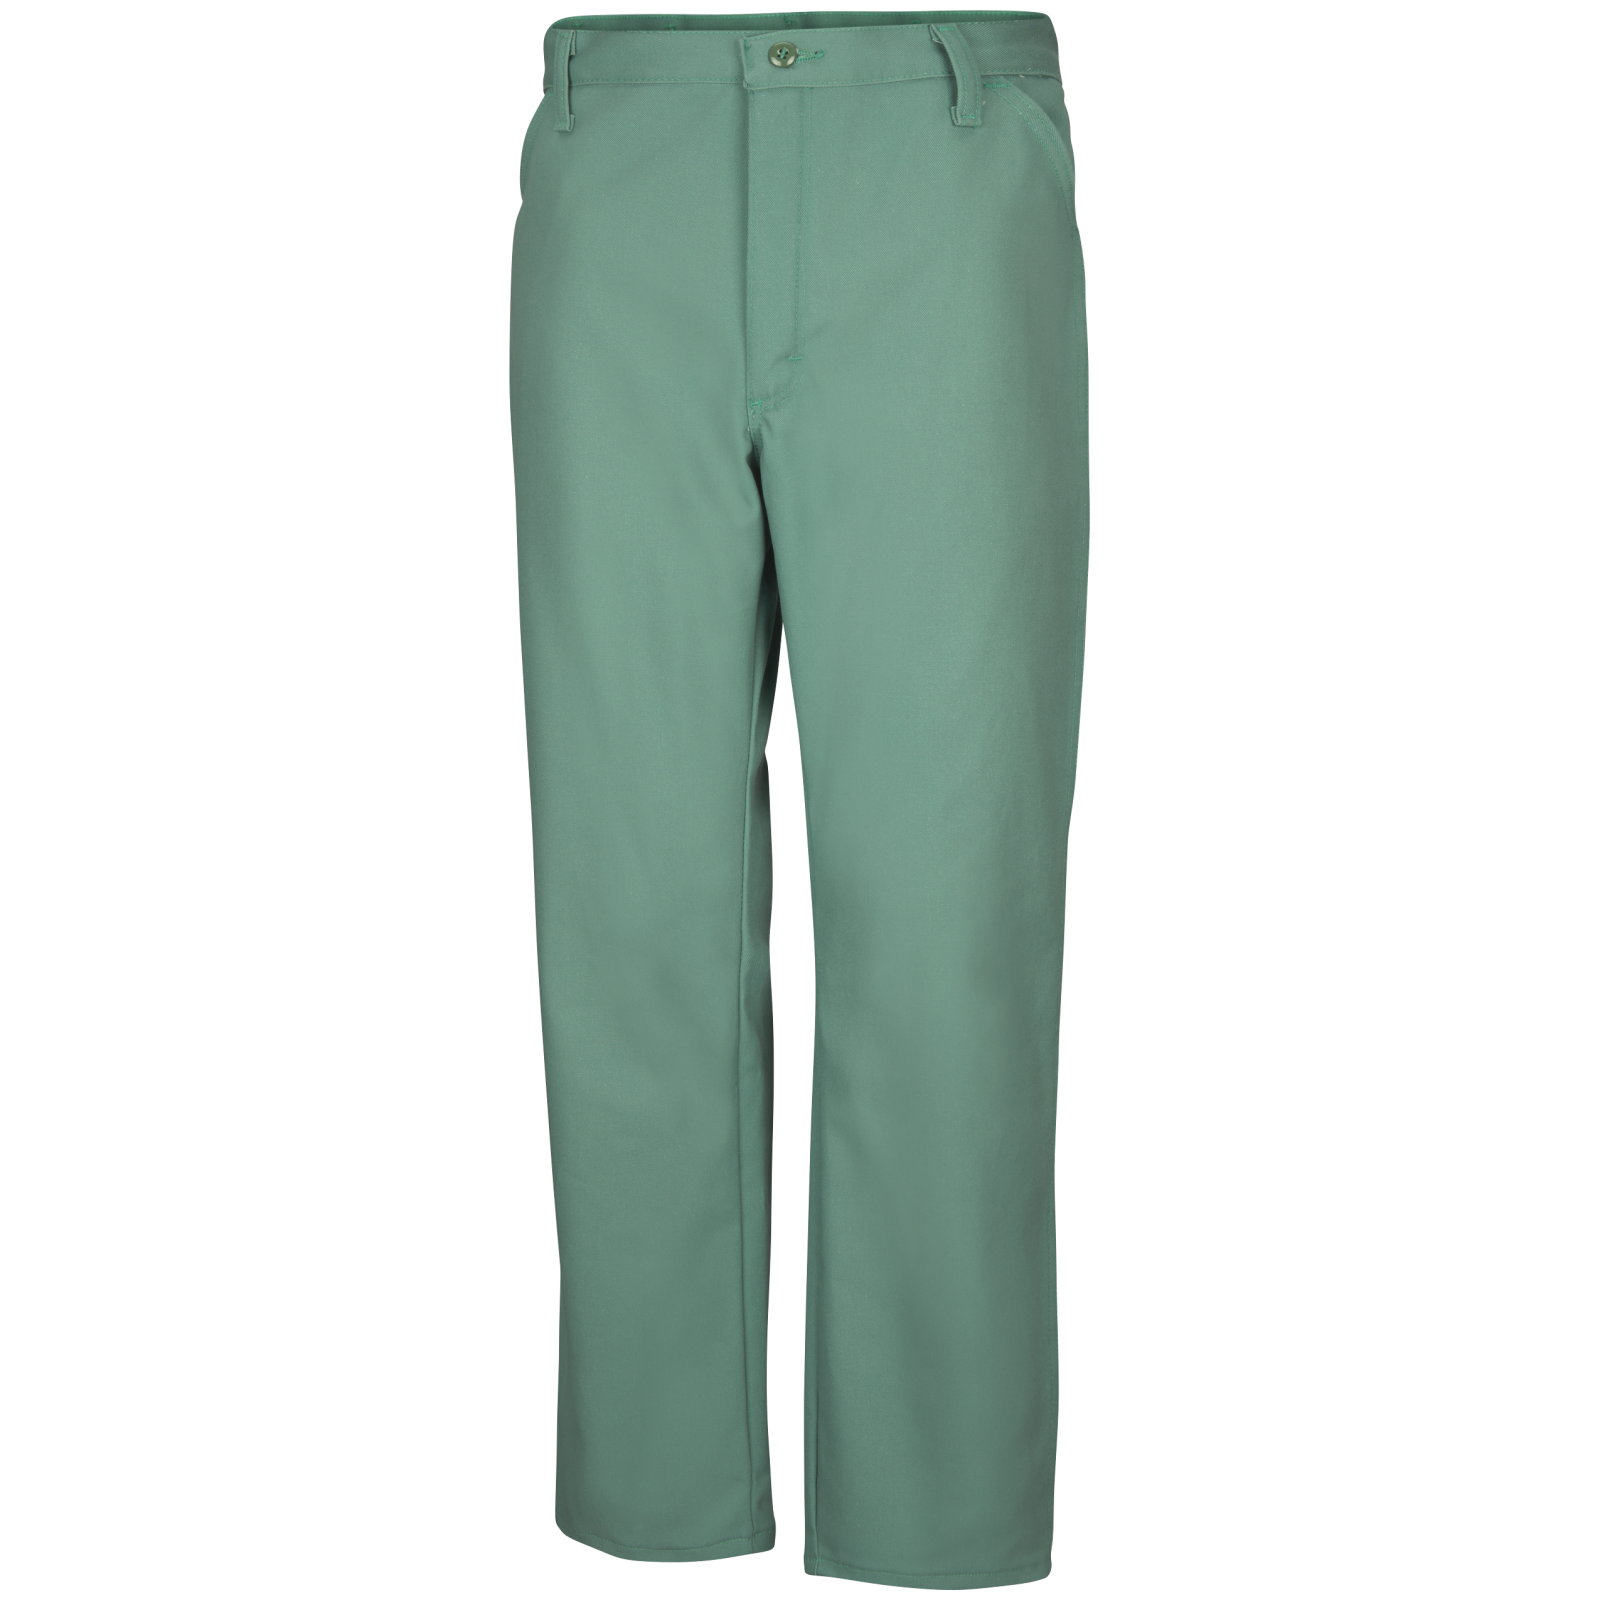 flame resistant work clothes | Fire retardant clothing, Work wear, Work  pants